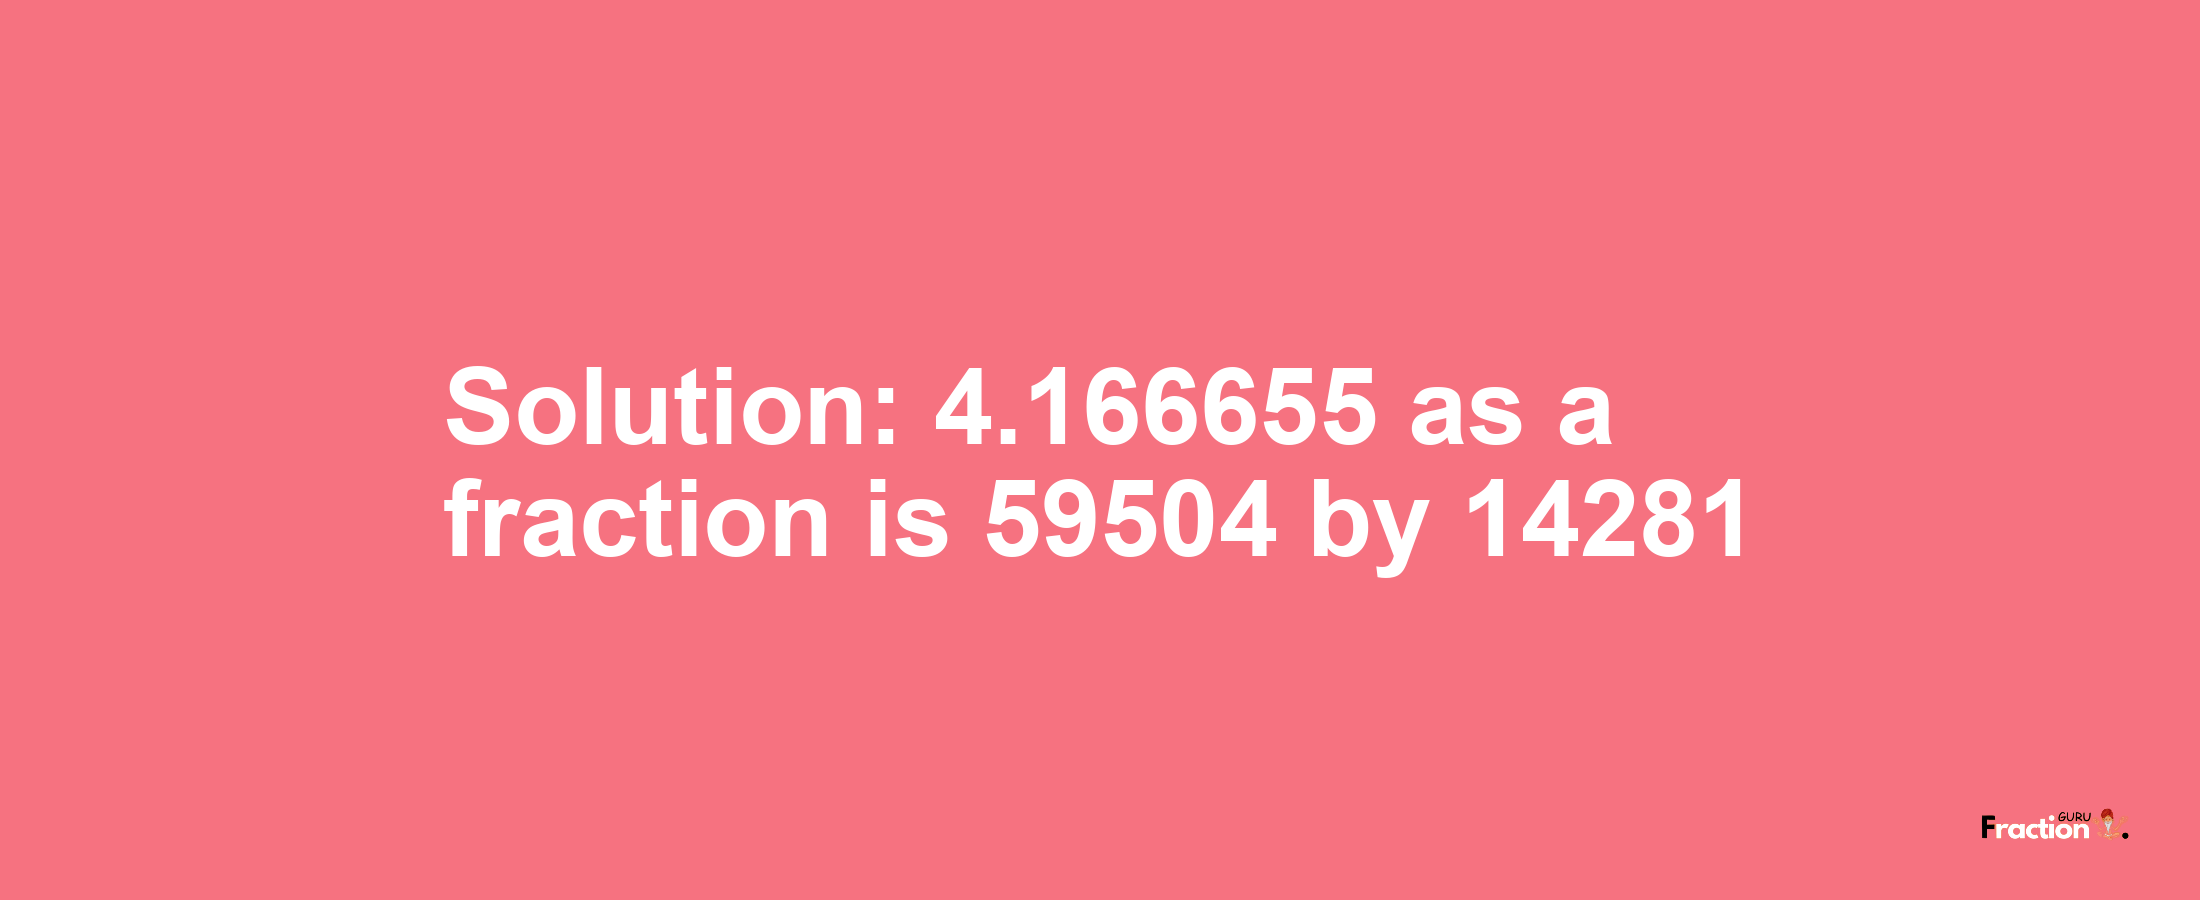 Solution:4.166655 as a fraction is 59504/14281